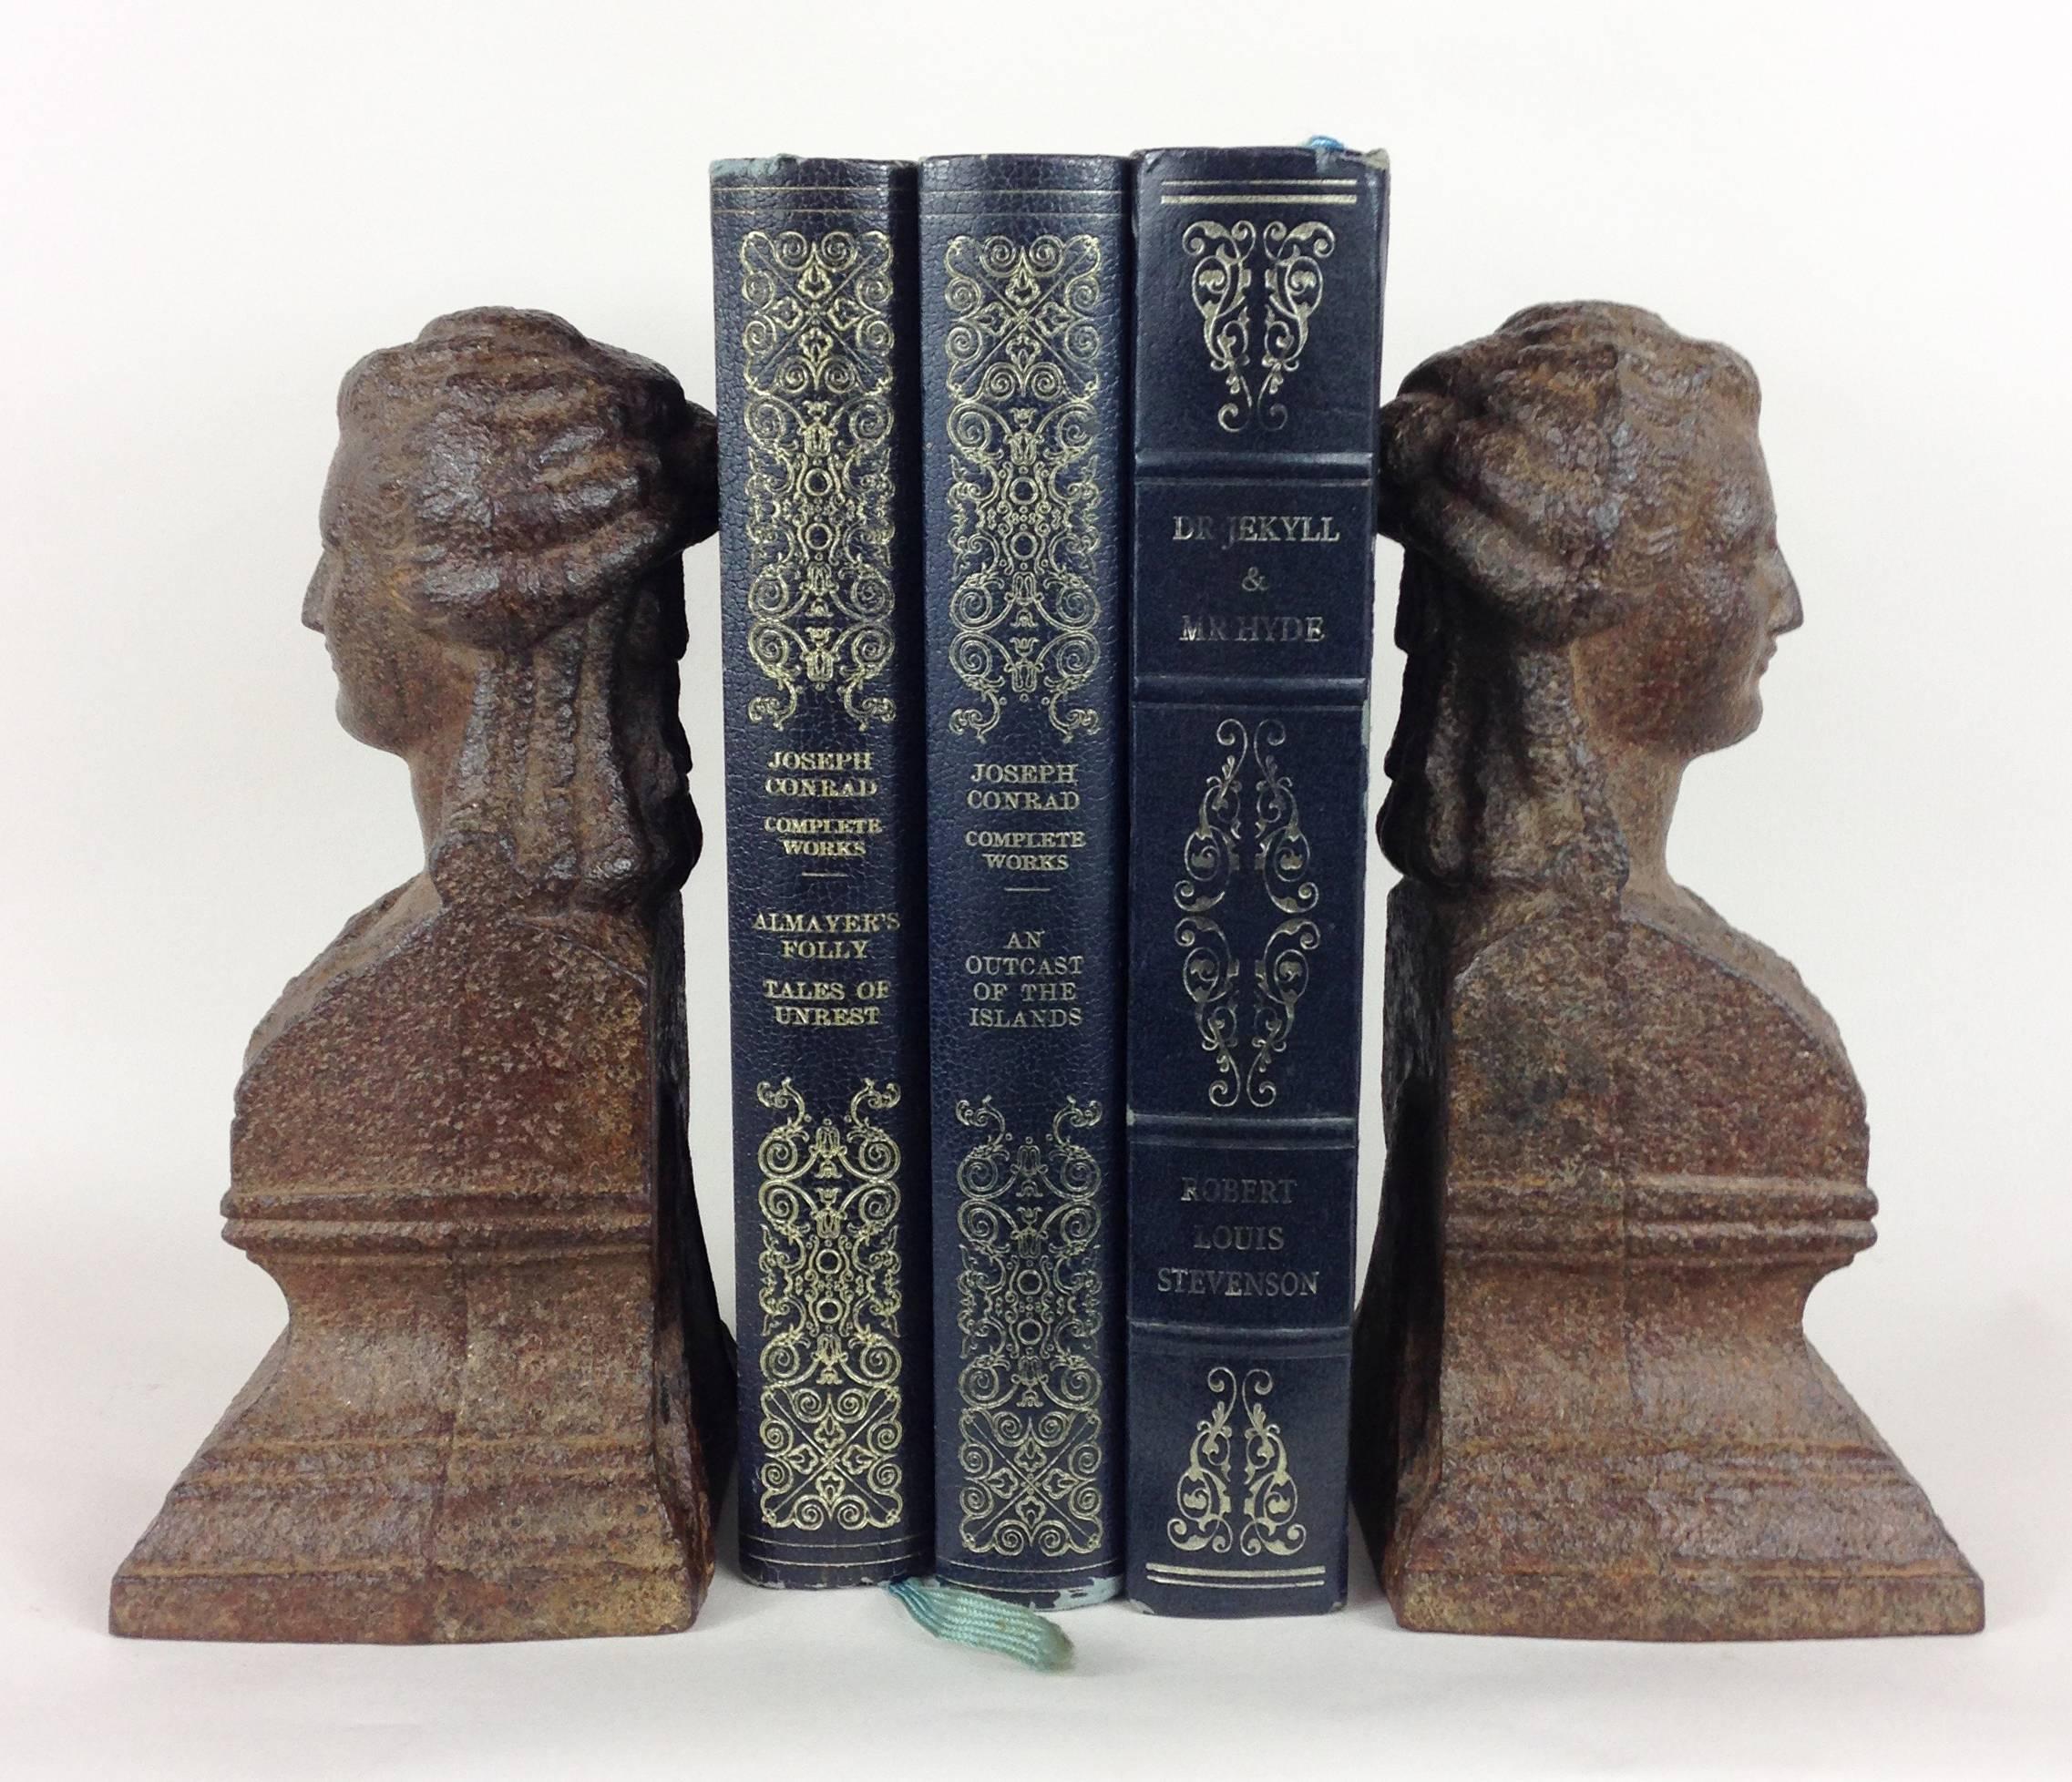 A fine pair of cast iron Regency period bookends depicting female heads.

Due to the incredible weight of these pieces (combined weight of almost 9Kg) they could feasibly be used as two individual door stops. Lead filled cast iron forms with